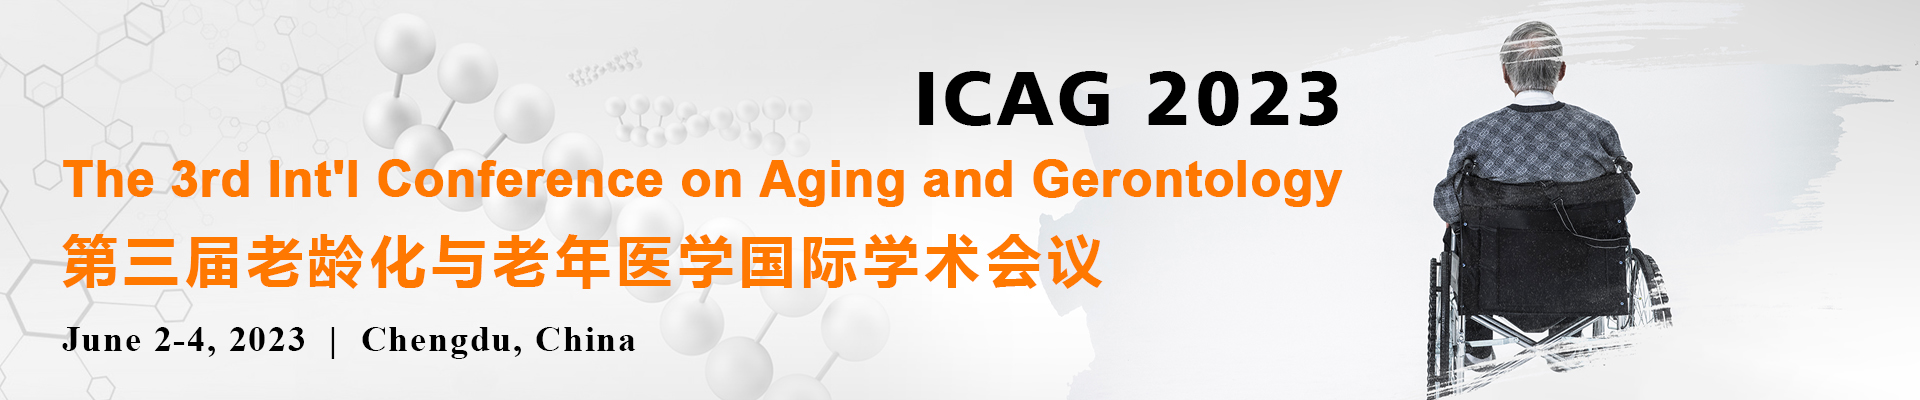 The 3rd Int'l Conference on Aging and Gerontology (ICAG 2023), Chengdu, Sichuan, China